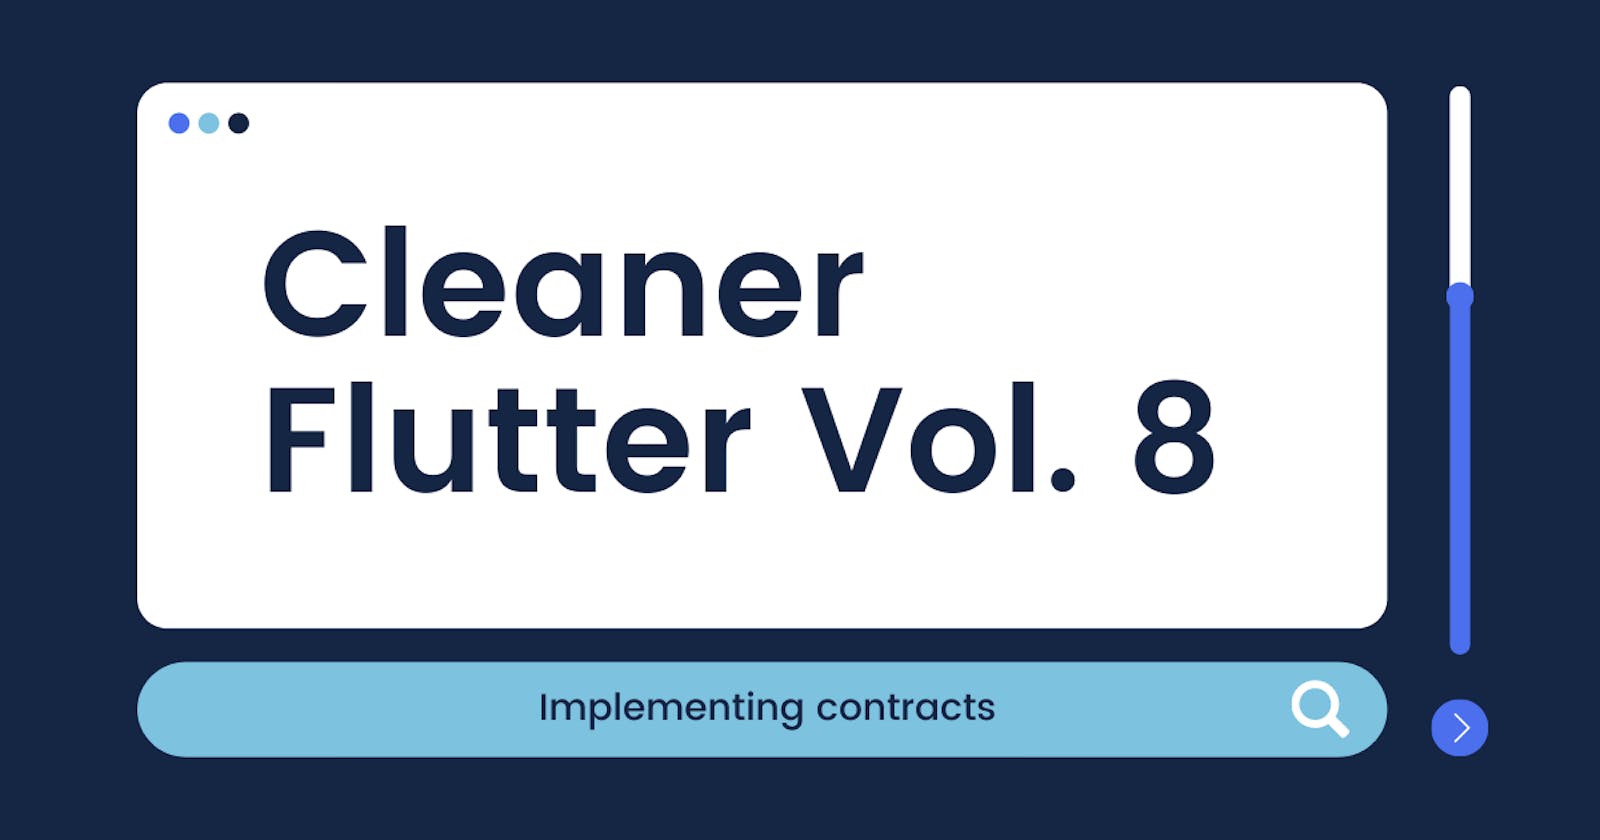 Cleaner Flutter Vol. 8: Implementing contracts